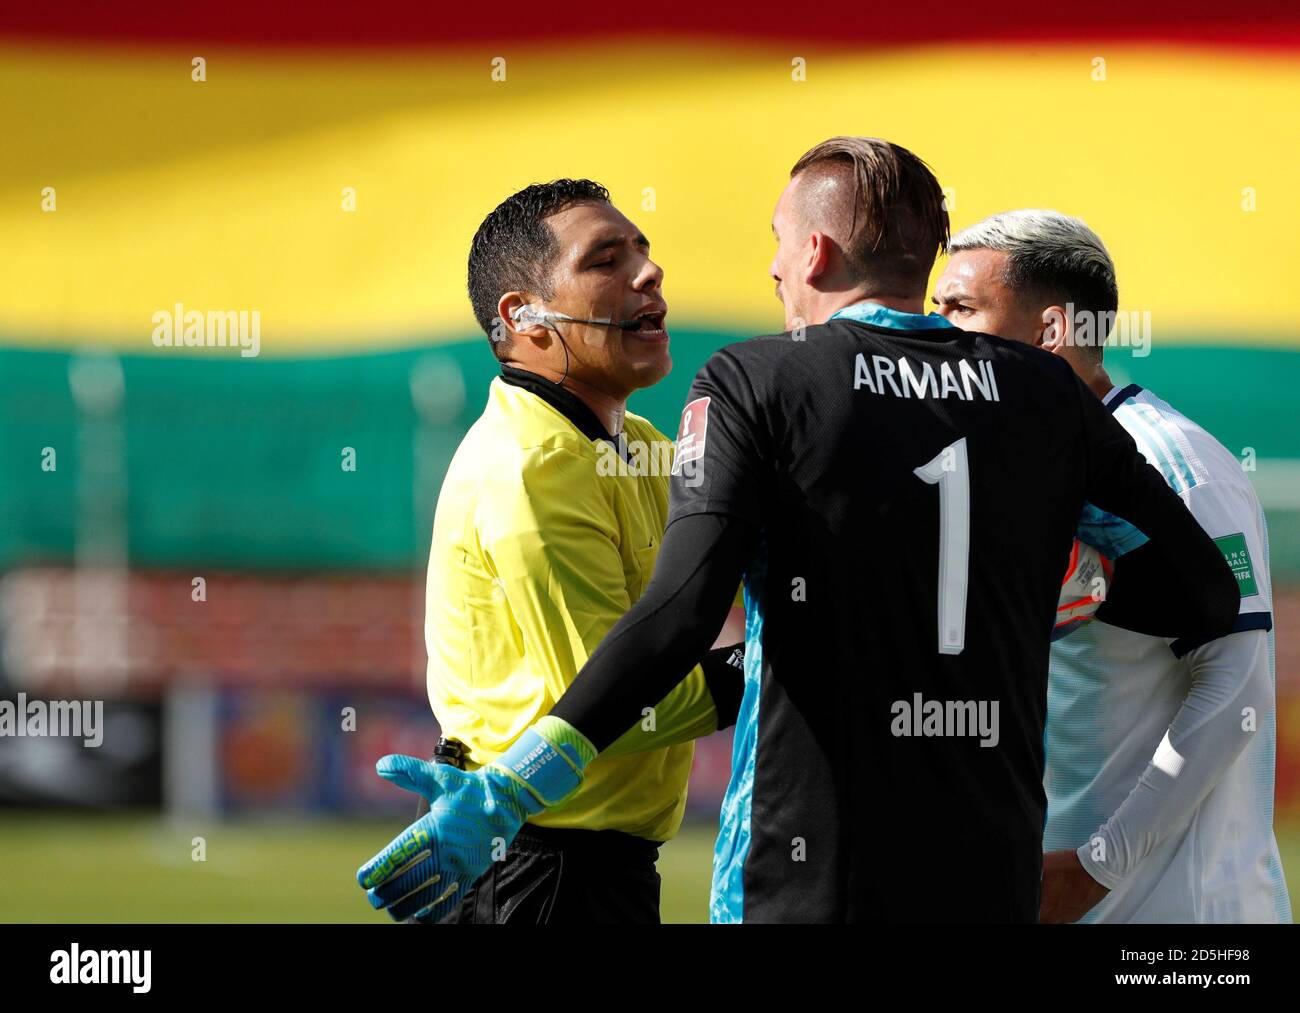 Franco Armani High Resolution Stock Photography And Images Alamy